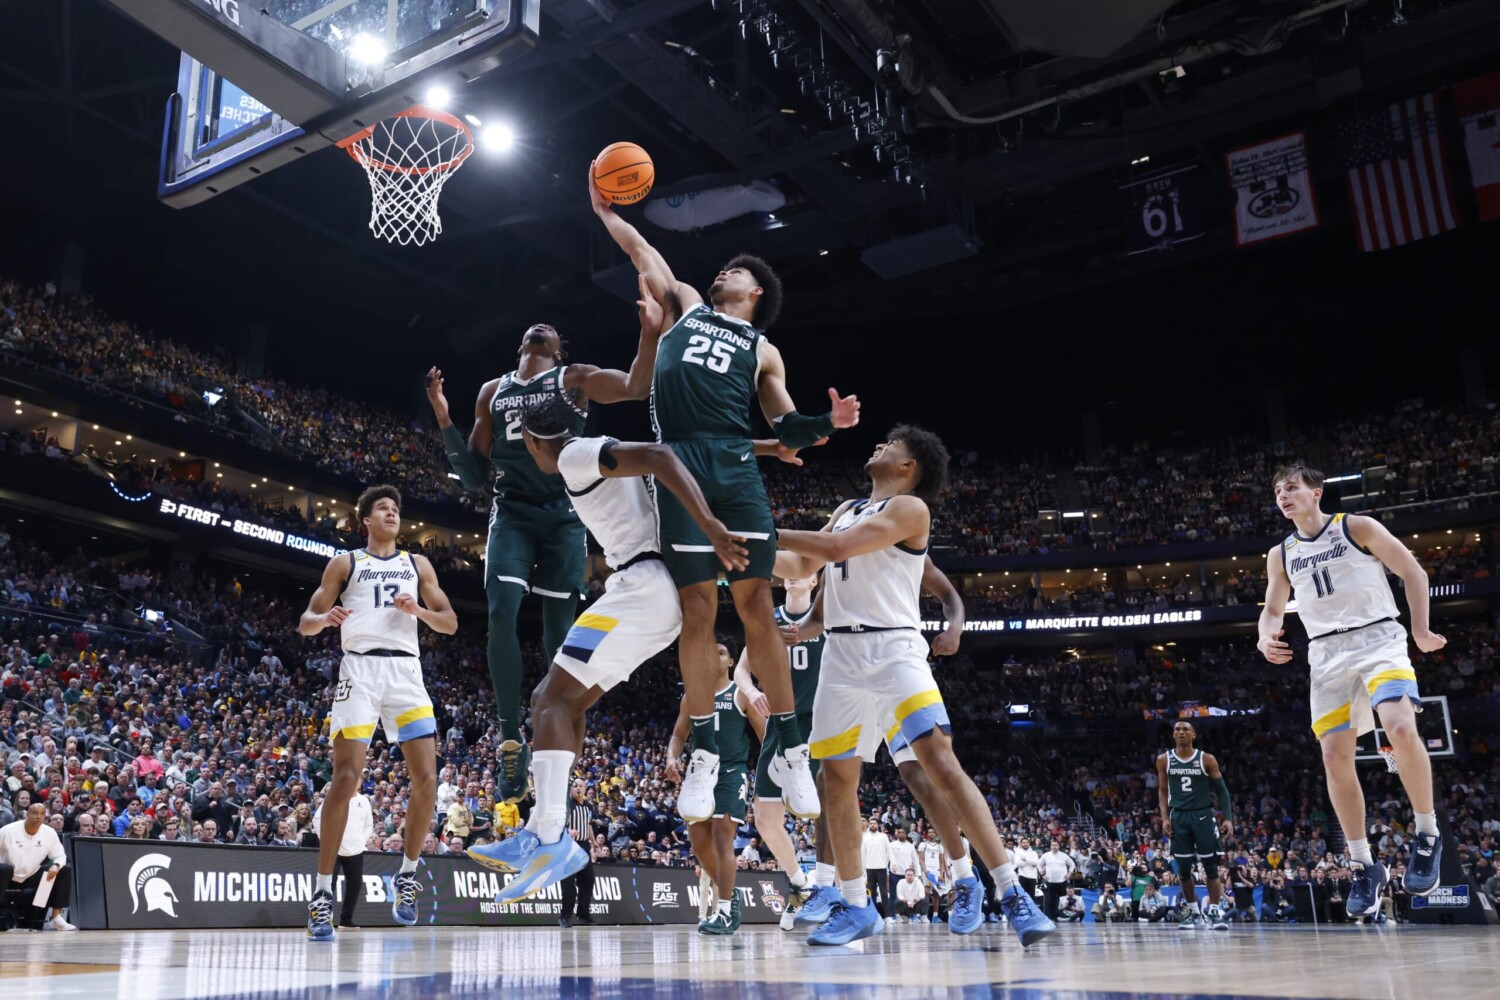 A Michigan State basketball player drives the rim against Marquette in the men's March Madness tournament.